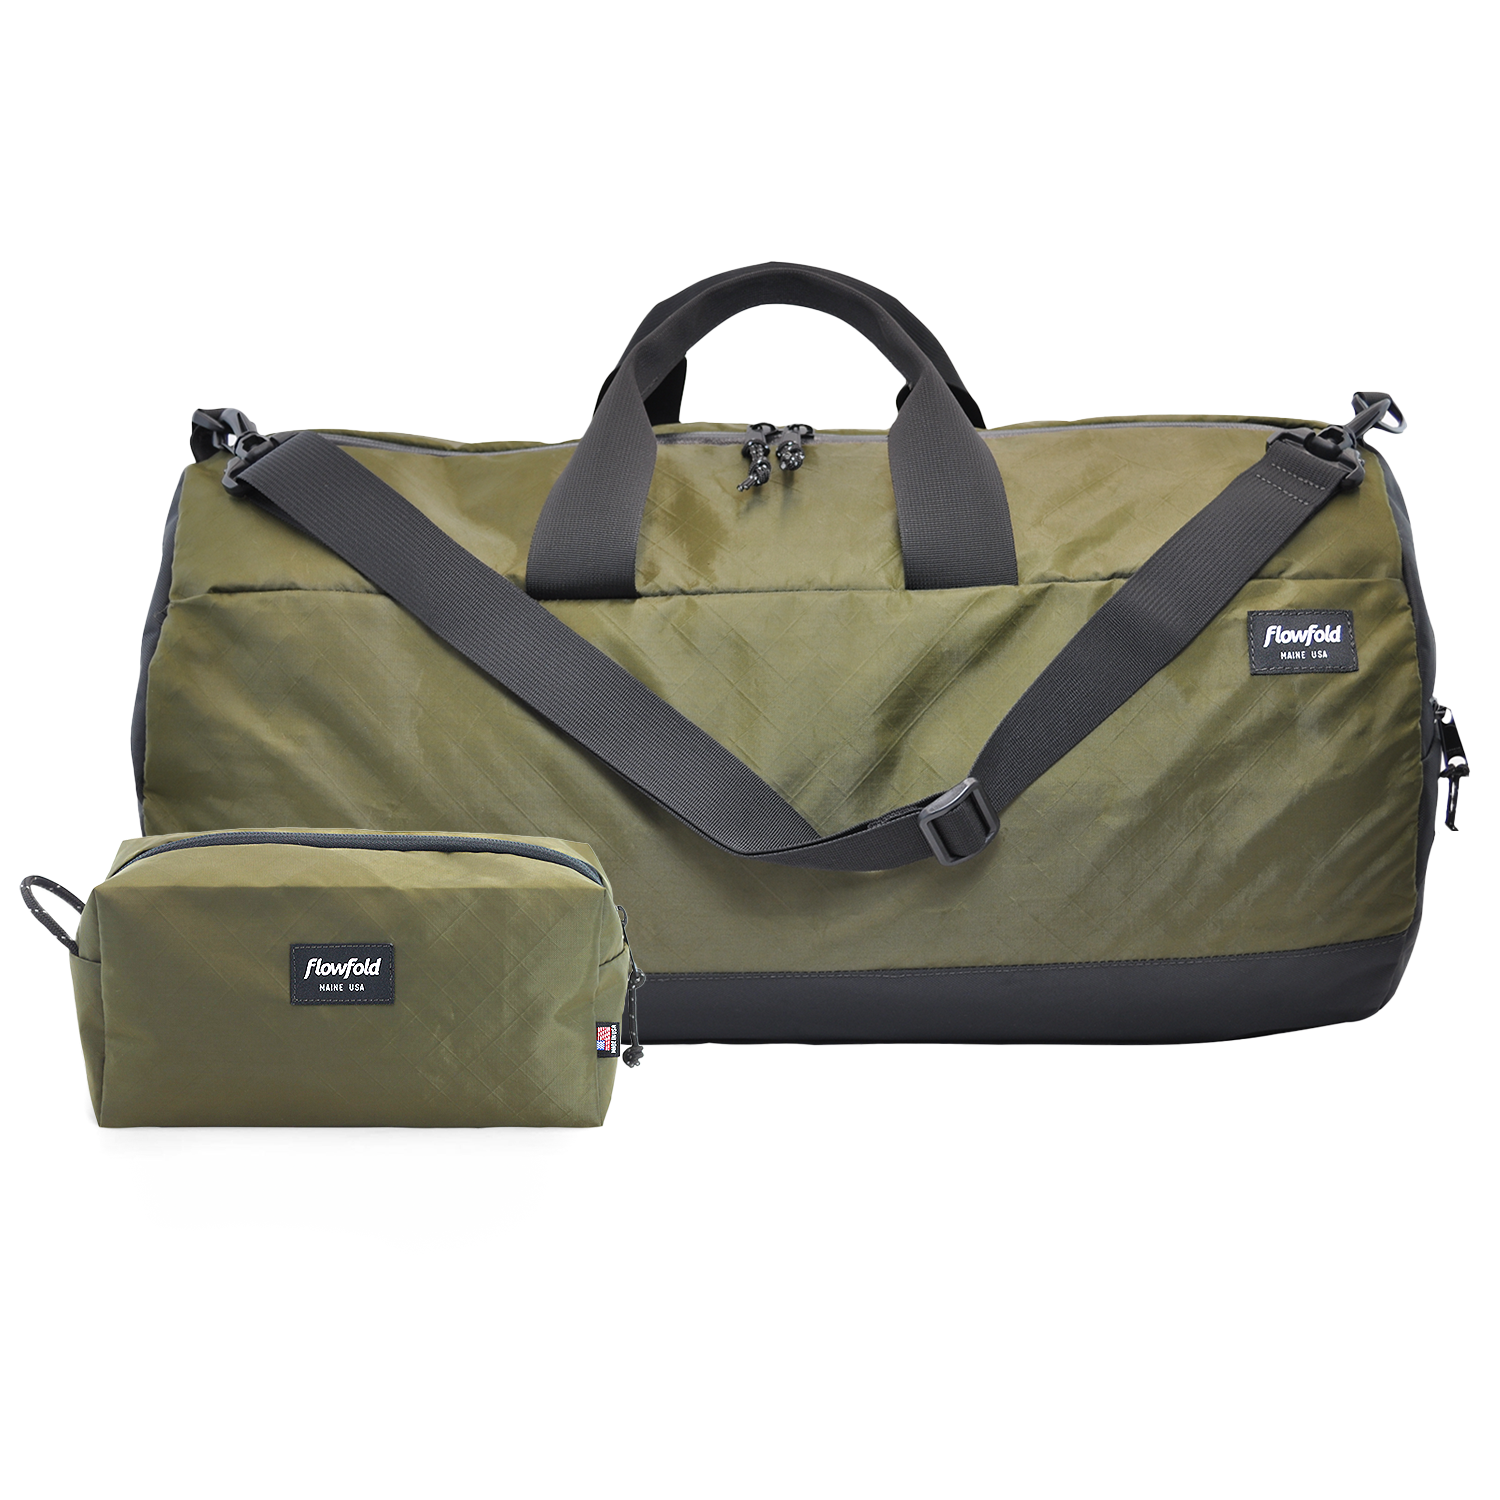 Flowfold Bar Harbor Kit: Stormproof Conductor Duffle bag + Dopp Kit for travel and road trips, Olive